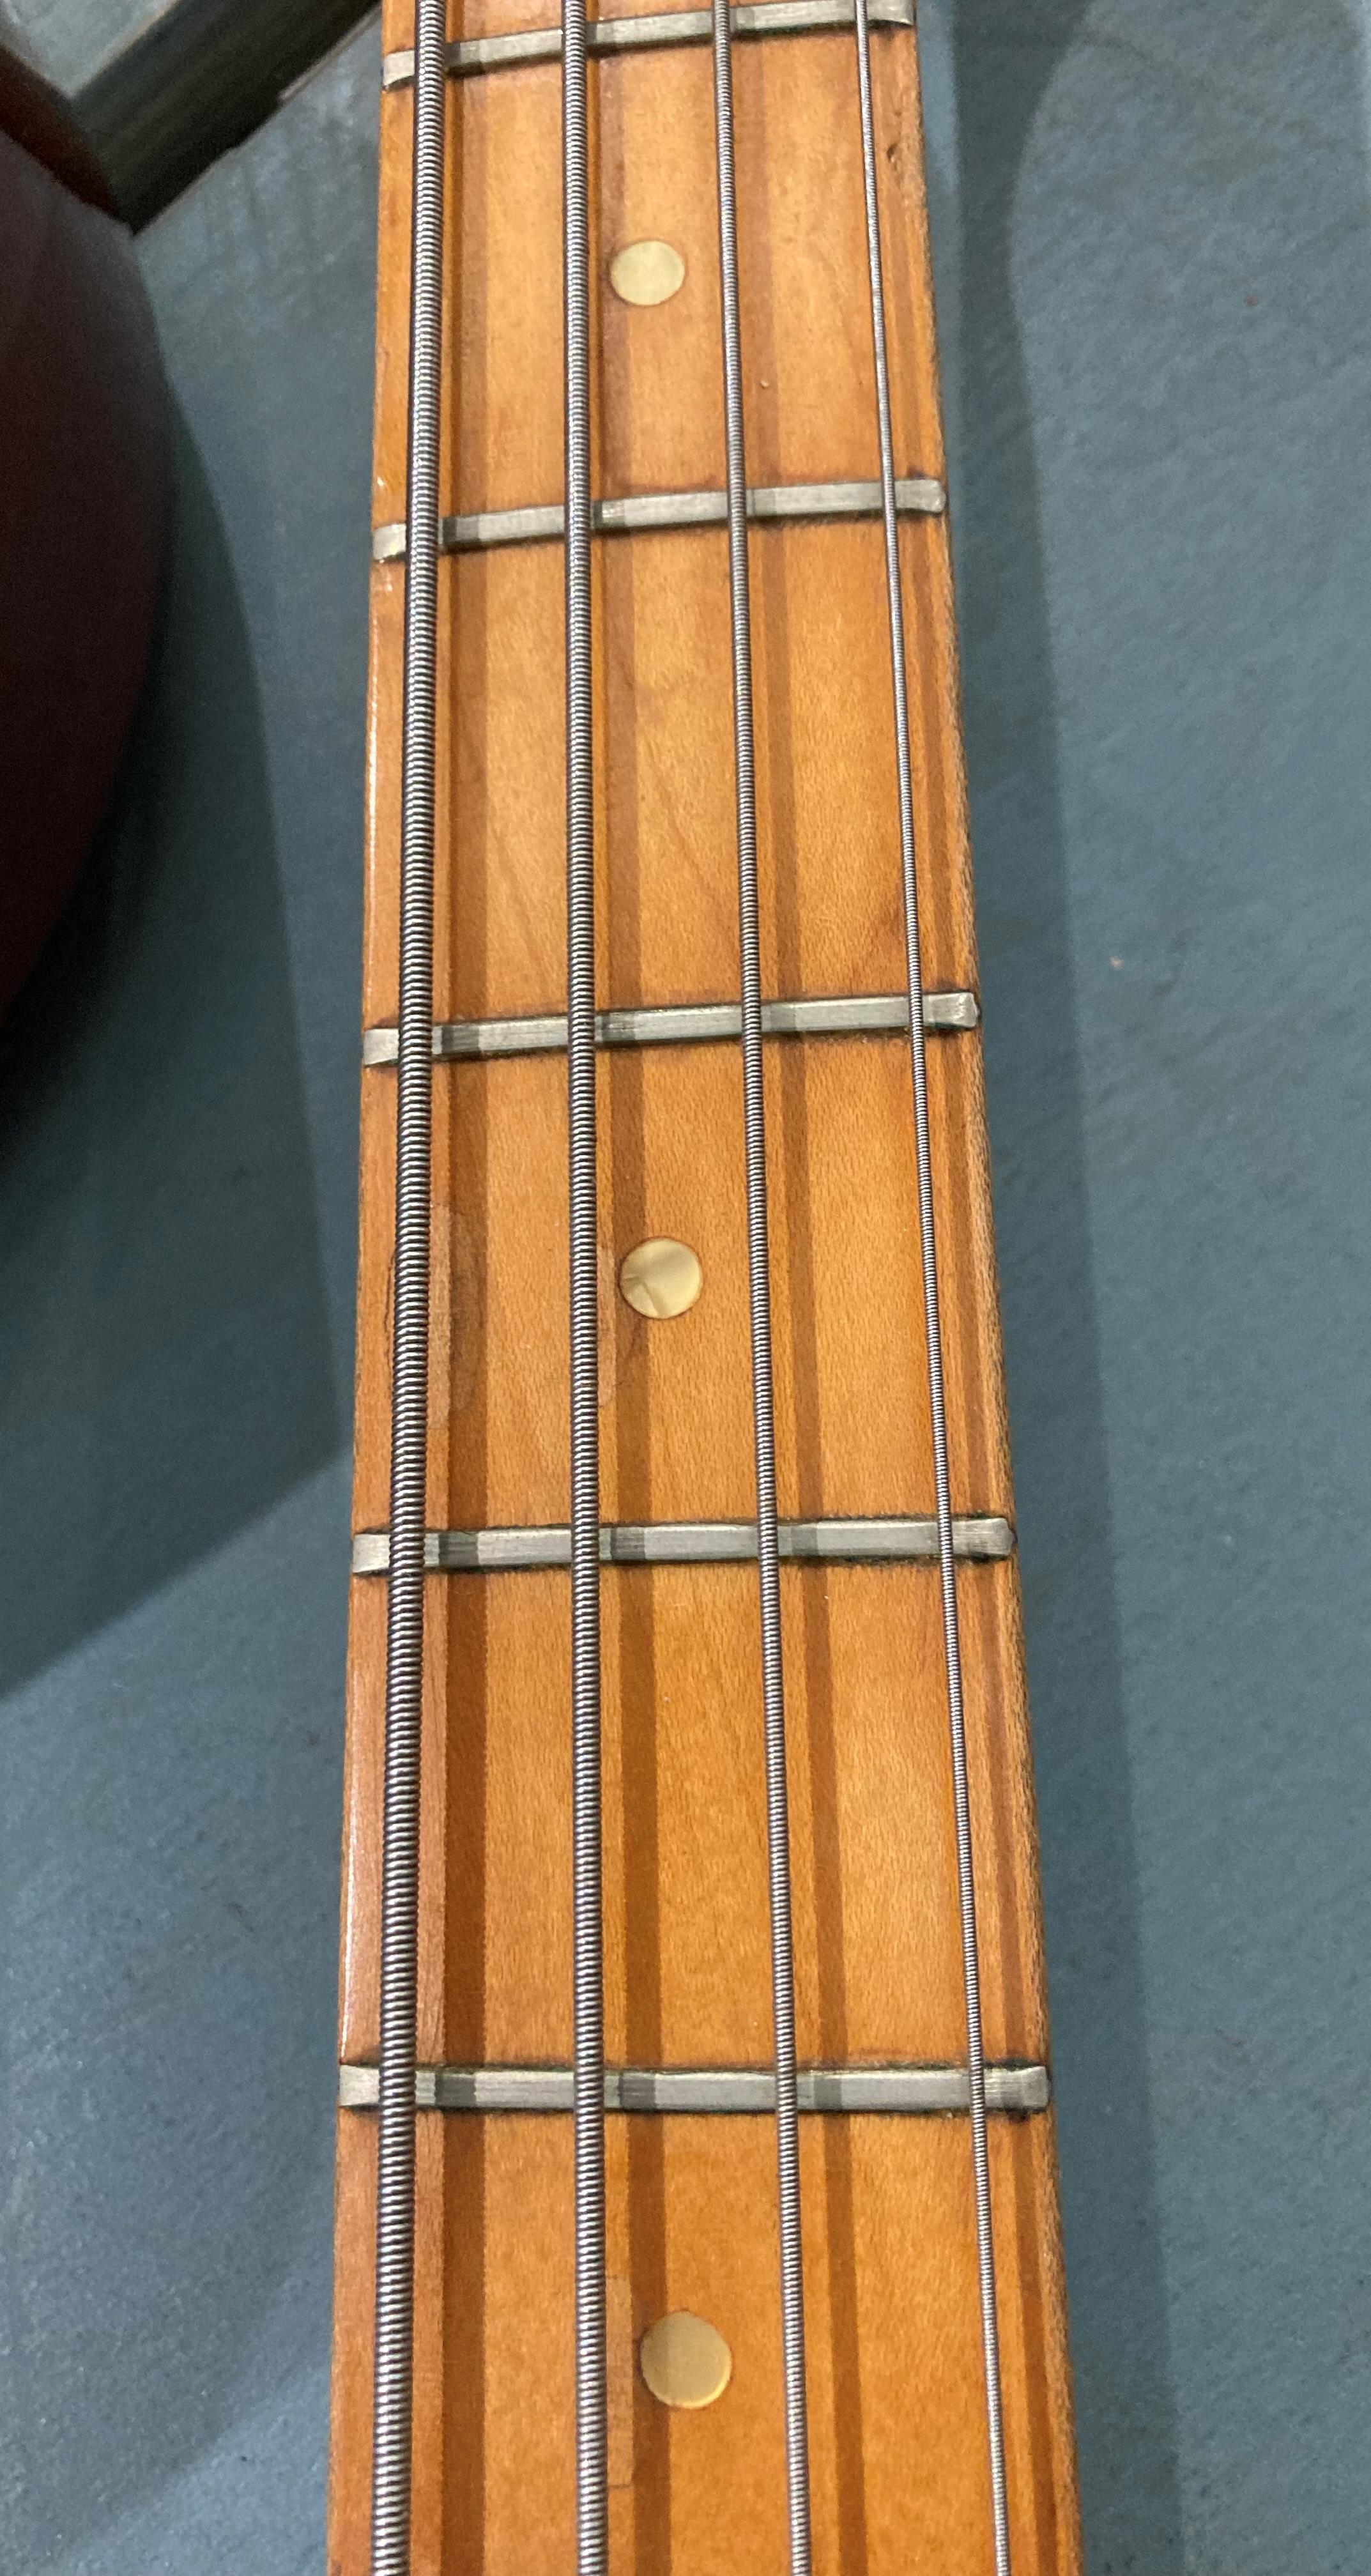 Gibson 'The Ripper' 1970's bass guitar, - Image 15 of 38